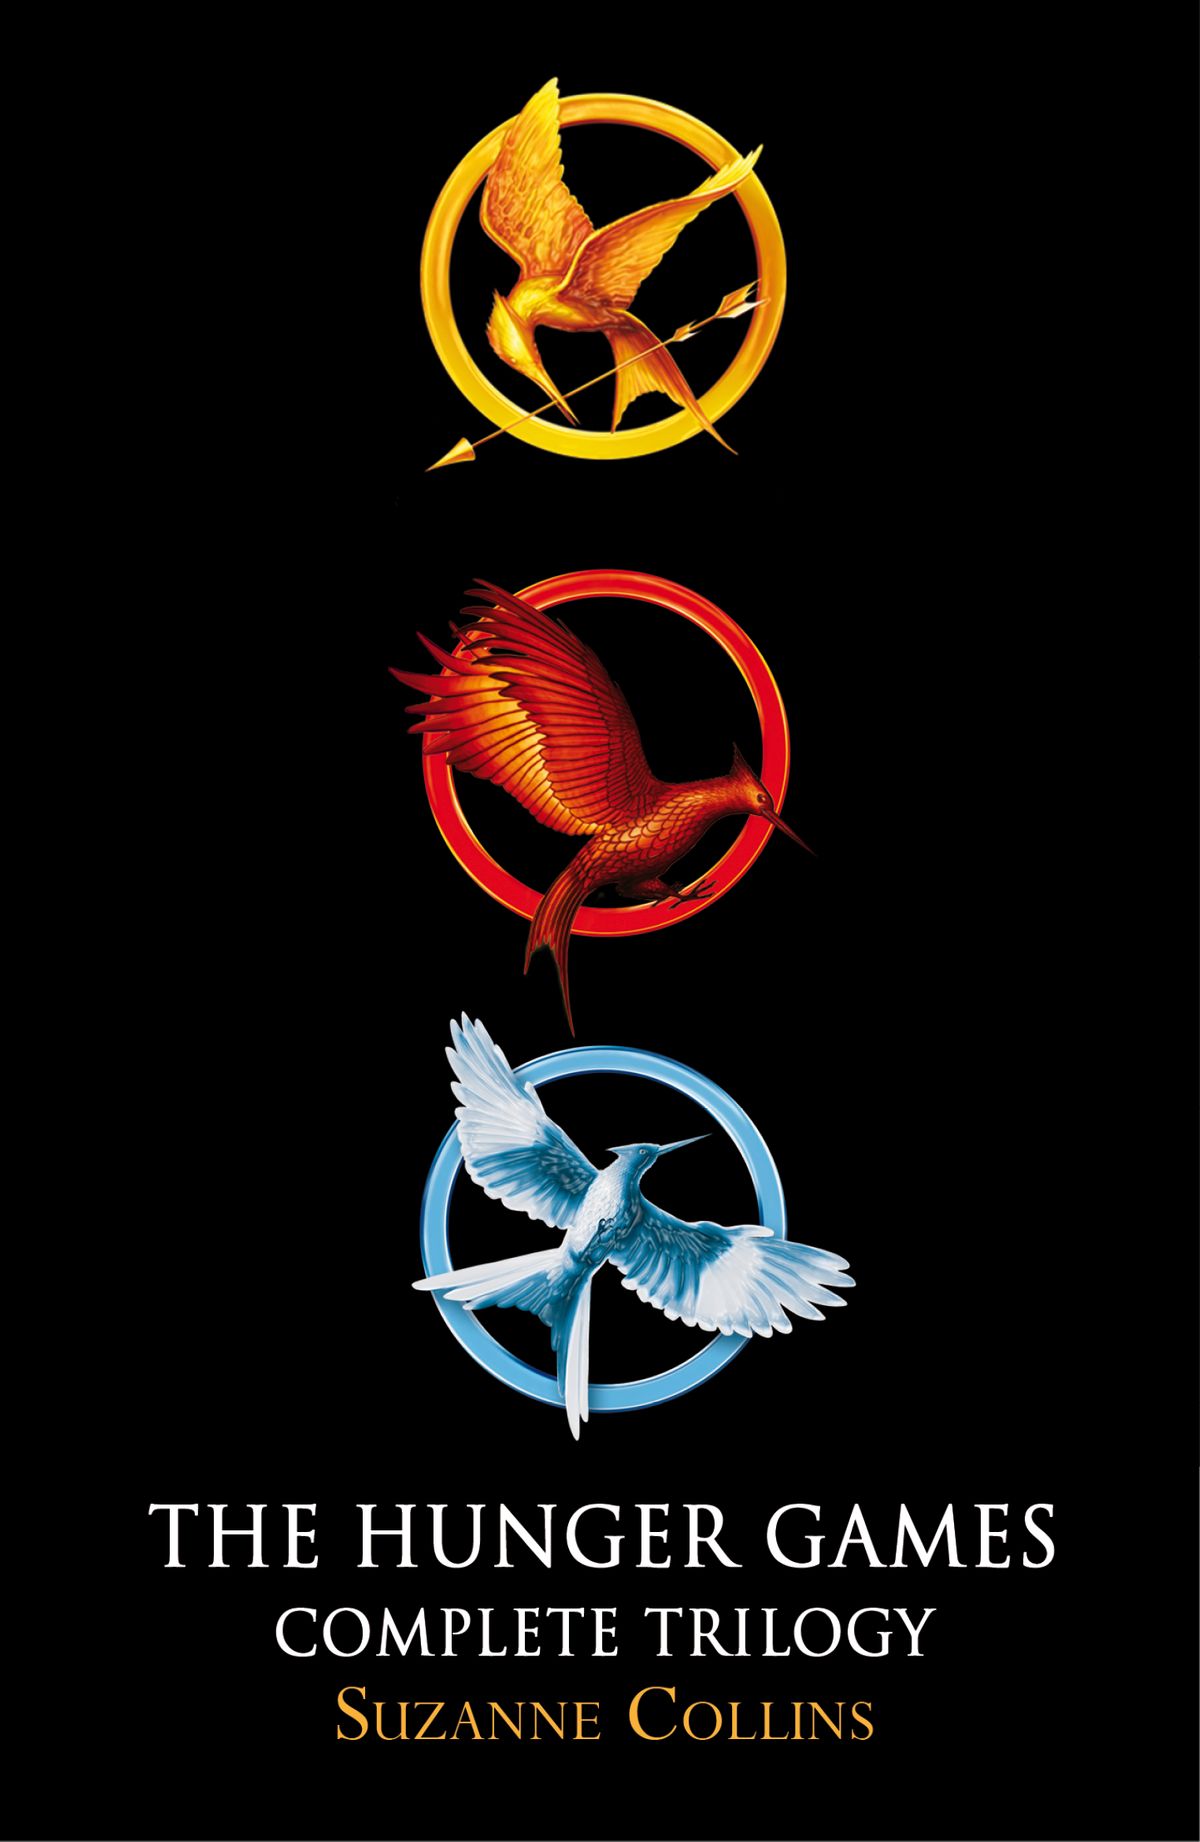 Buy The Hunger Games Complete Trilogy by Suzanne Collins at low price